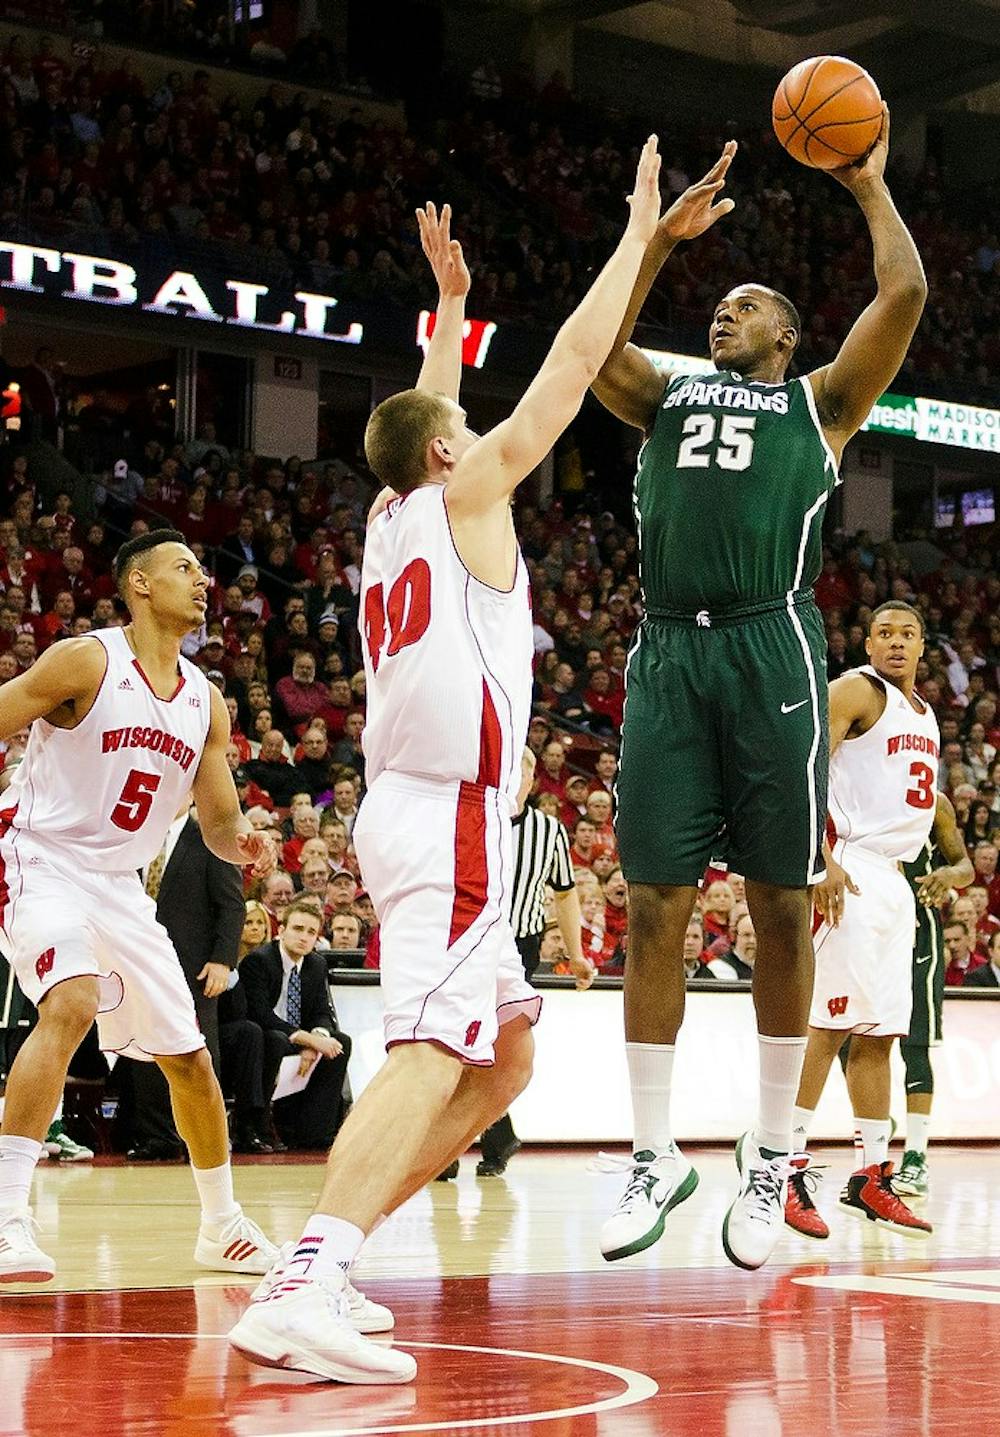 	<p>Senior center Derrick Nix takes a jump shot over Wisconsin defenders Tuesday, Jan. 22, 2013, at Kohl Center in Madison, Wisc. The Spartans defeated the Badgers 49-47 on the road. Grey Satterfield/The Daily Cardinal </p>